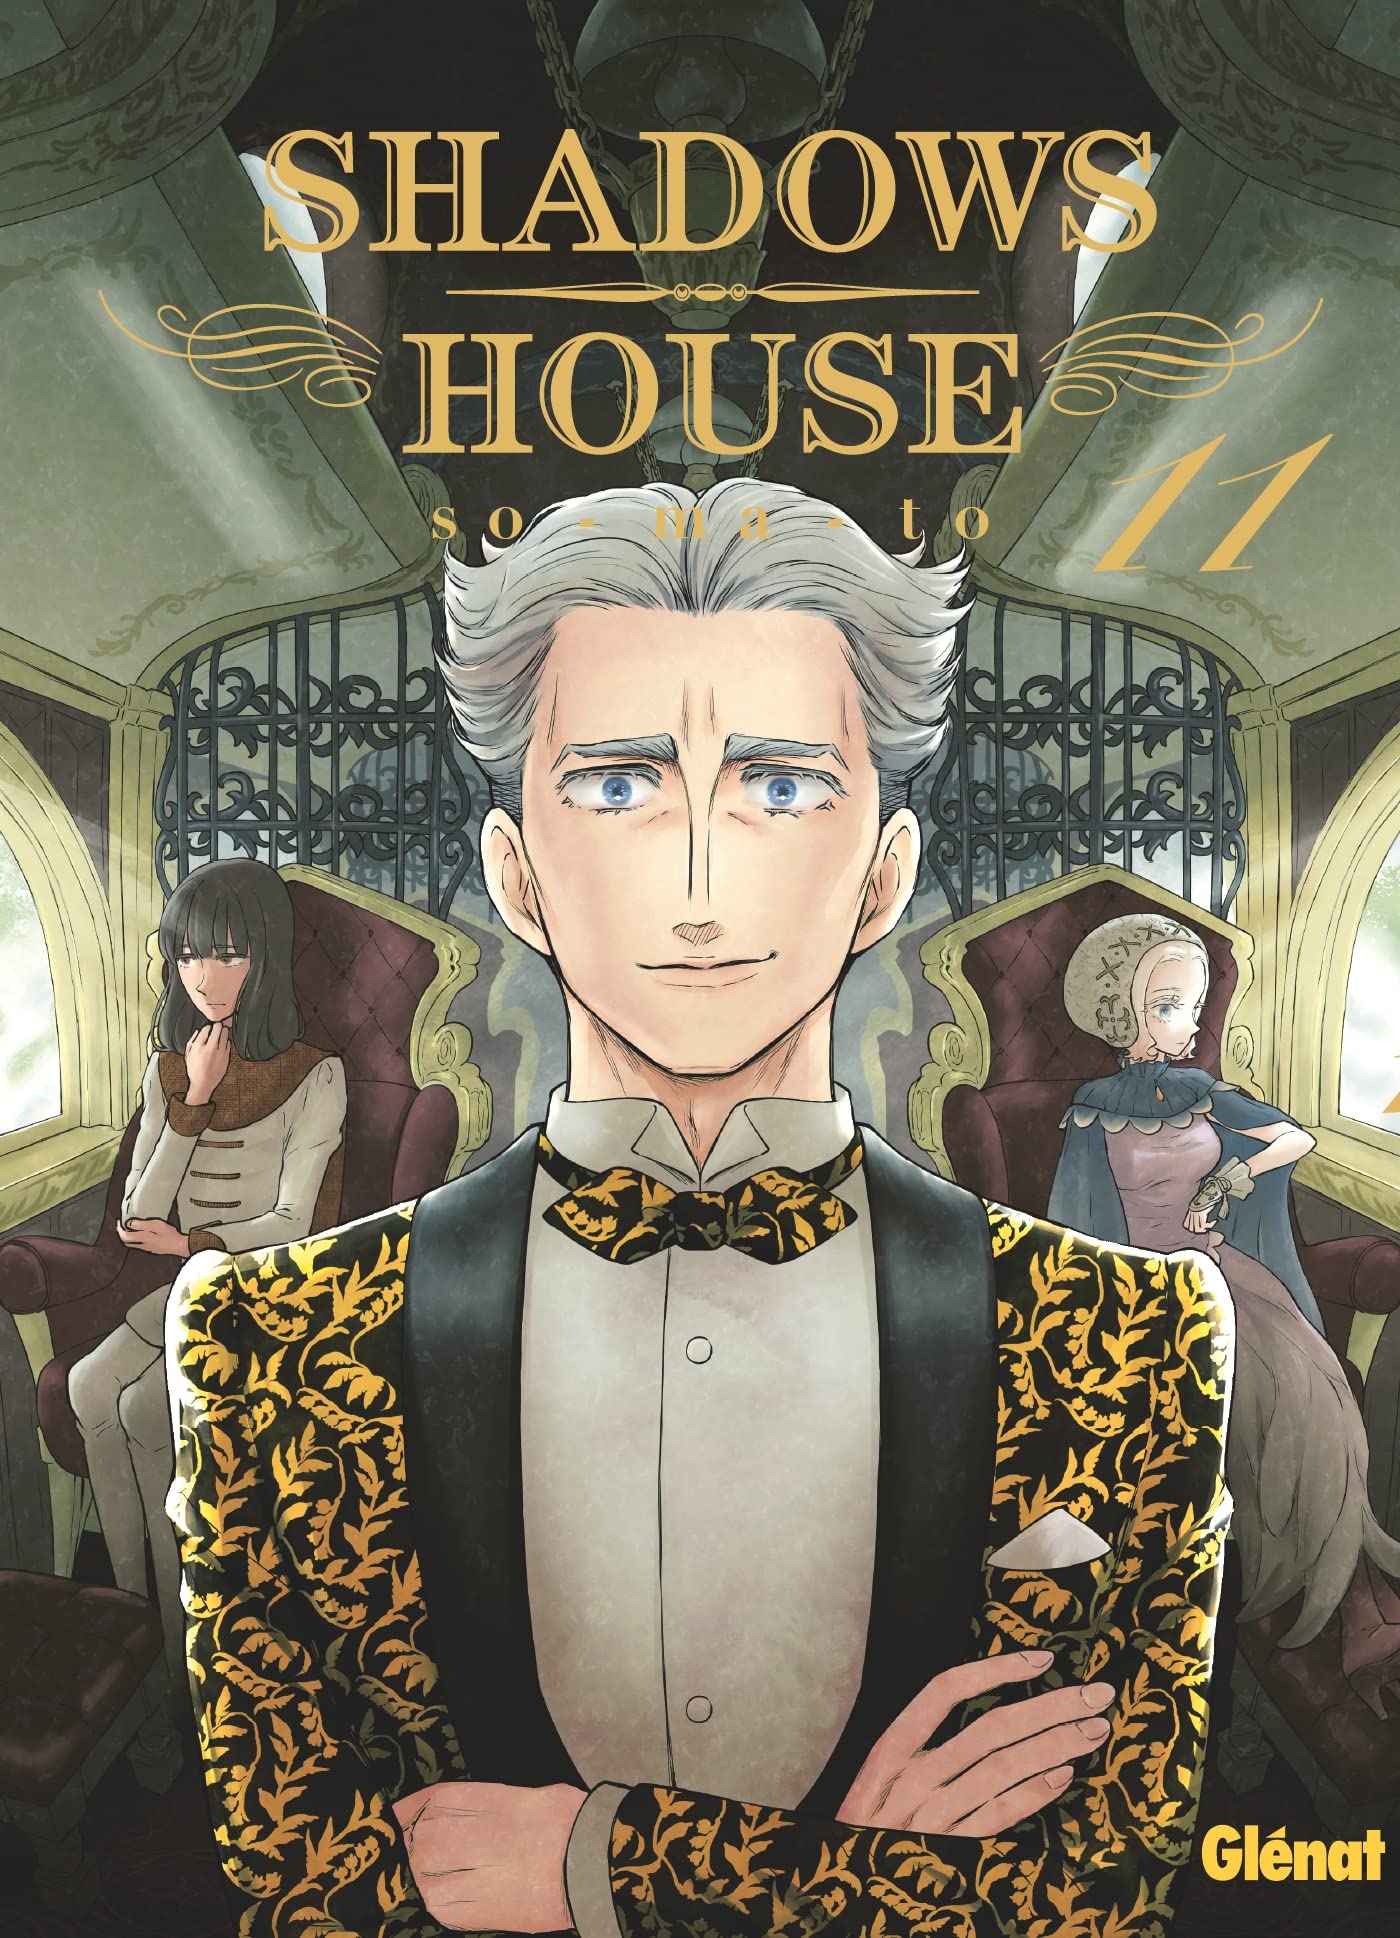 "Shadows House" tome 11 couverture